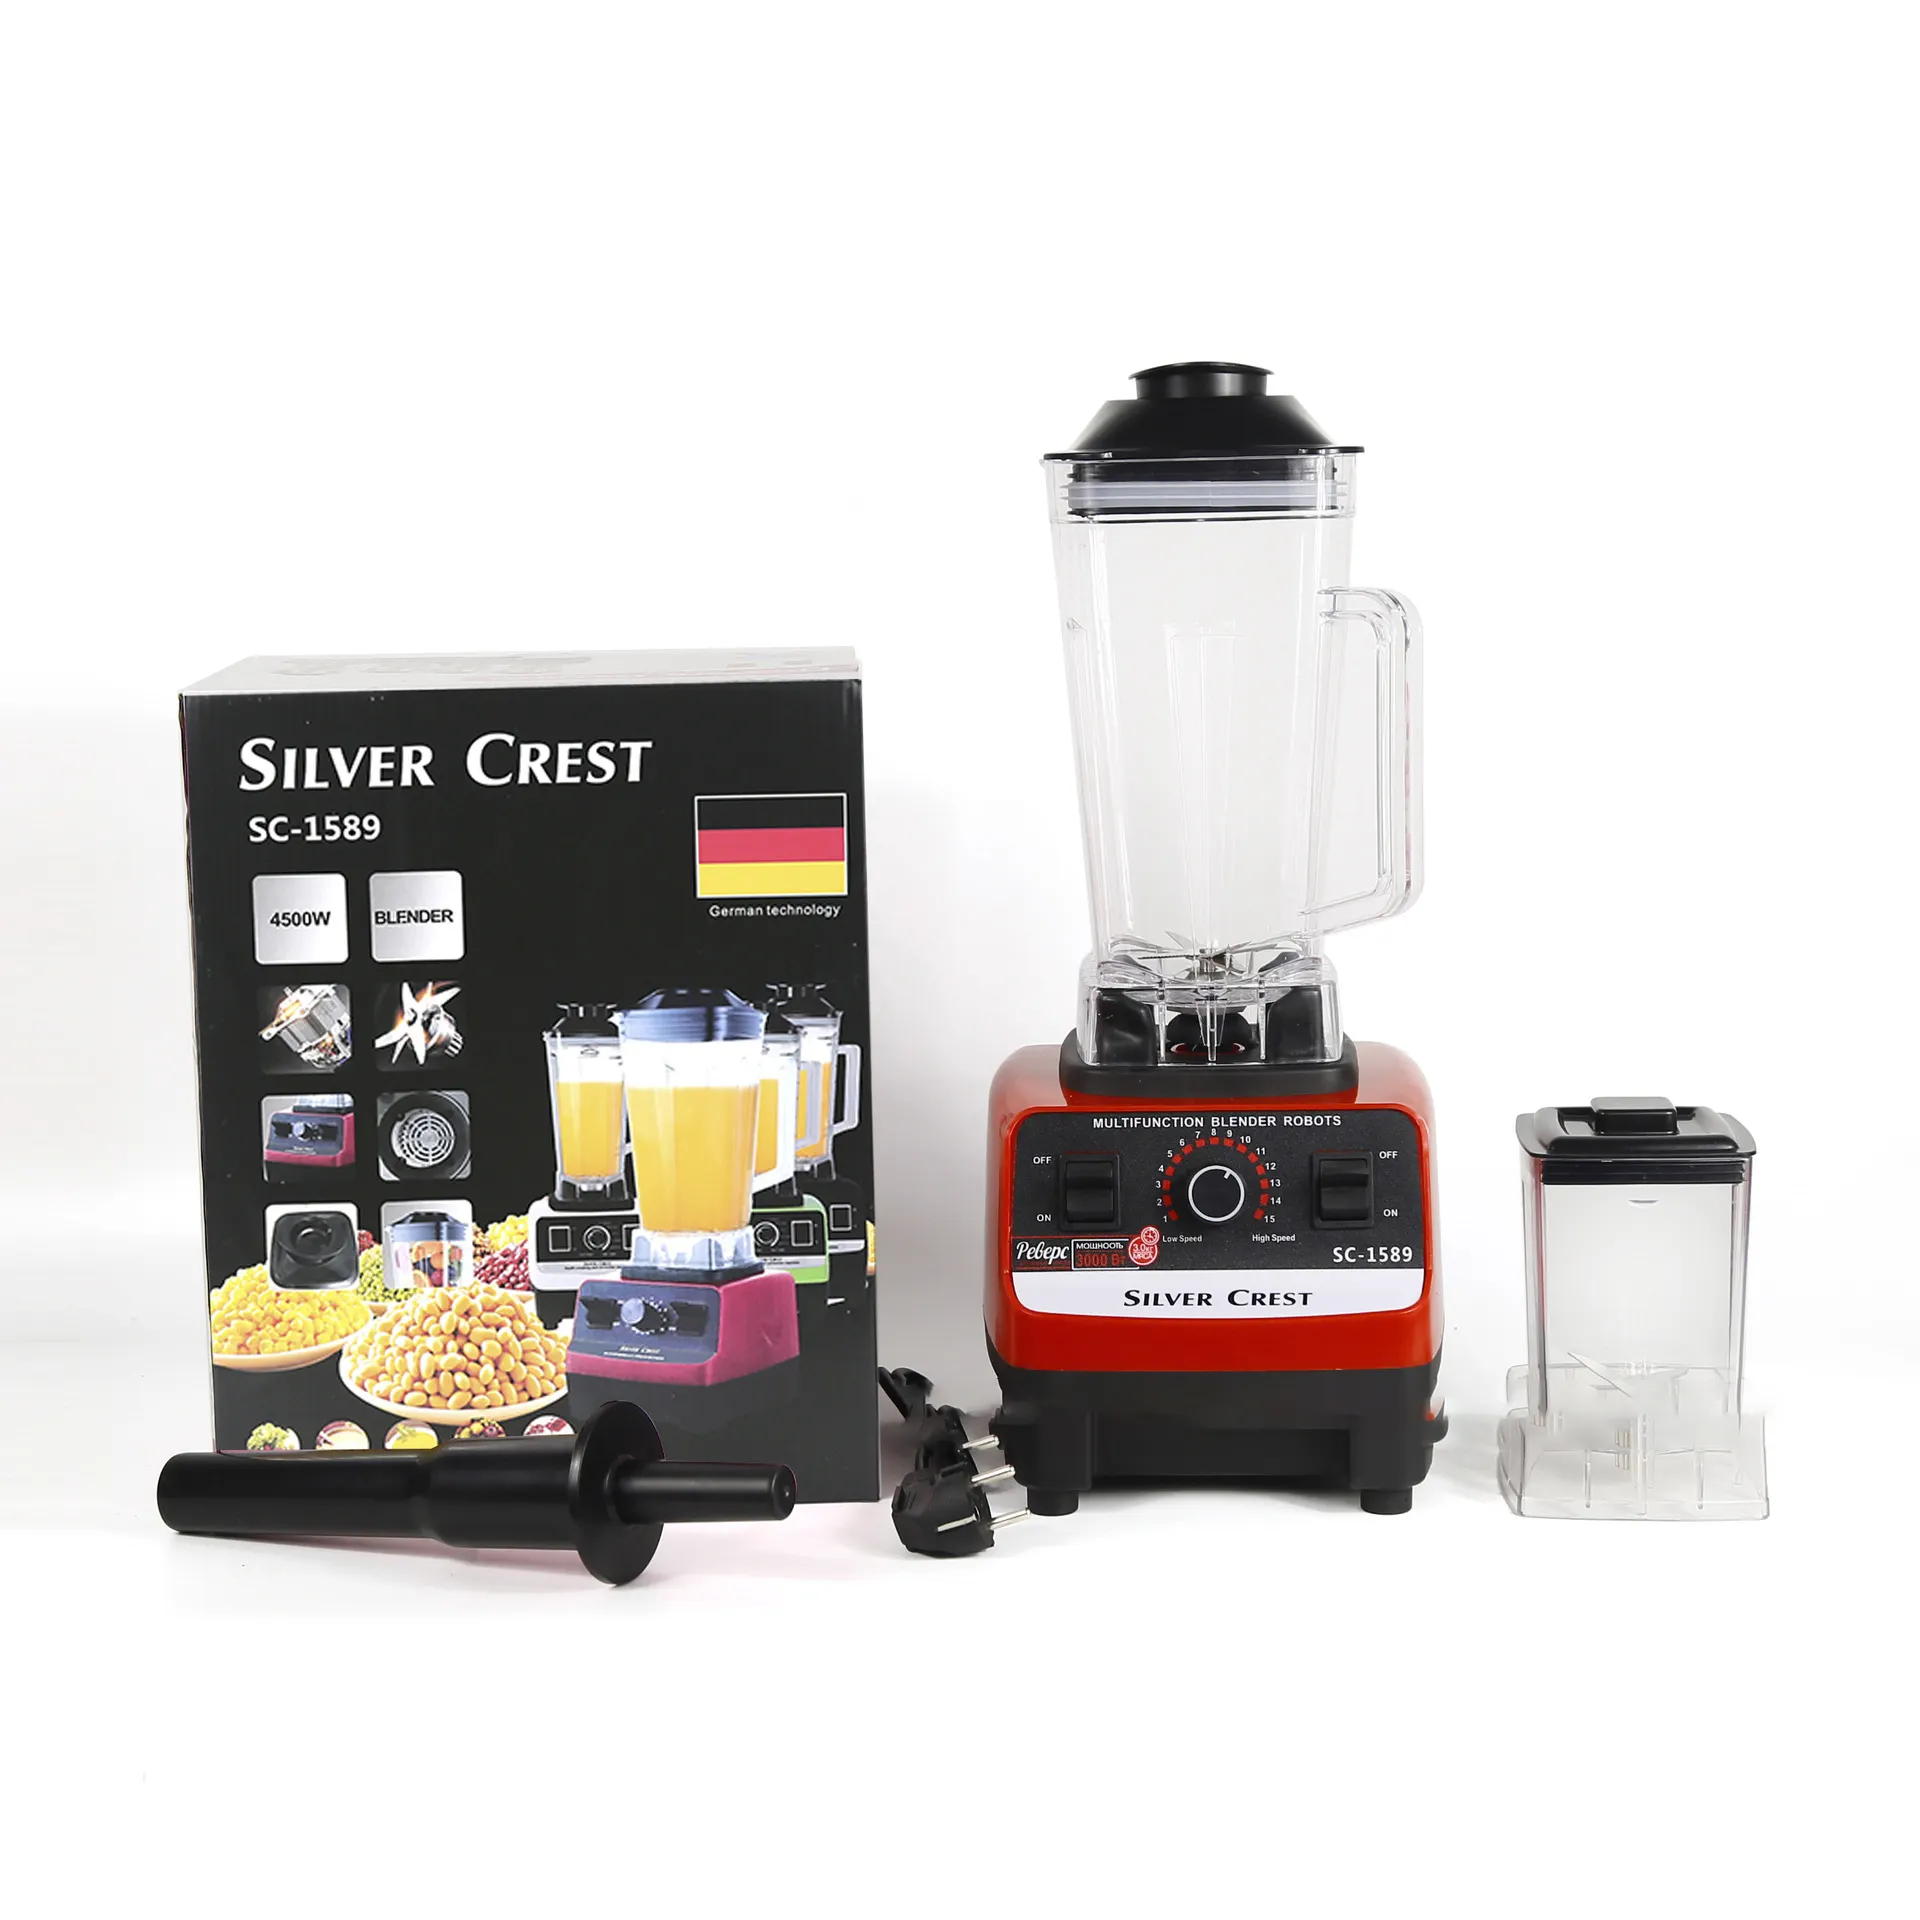 4500W Double Two Cup Silver Crest Blender Commercial Food Smoothie Blender and Juicers Portable Mixer Licuadora Mixeur